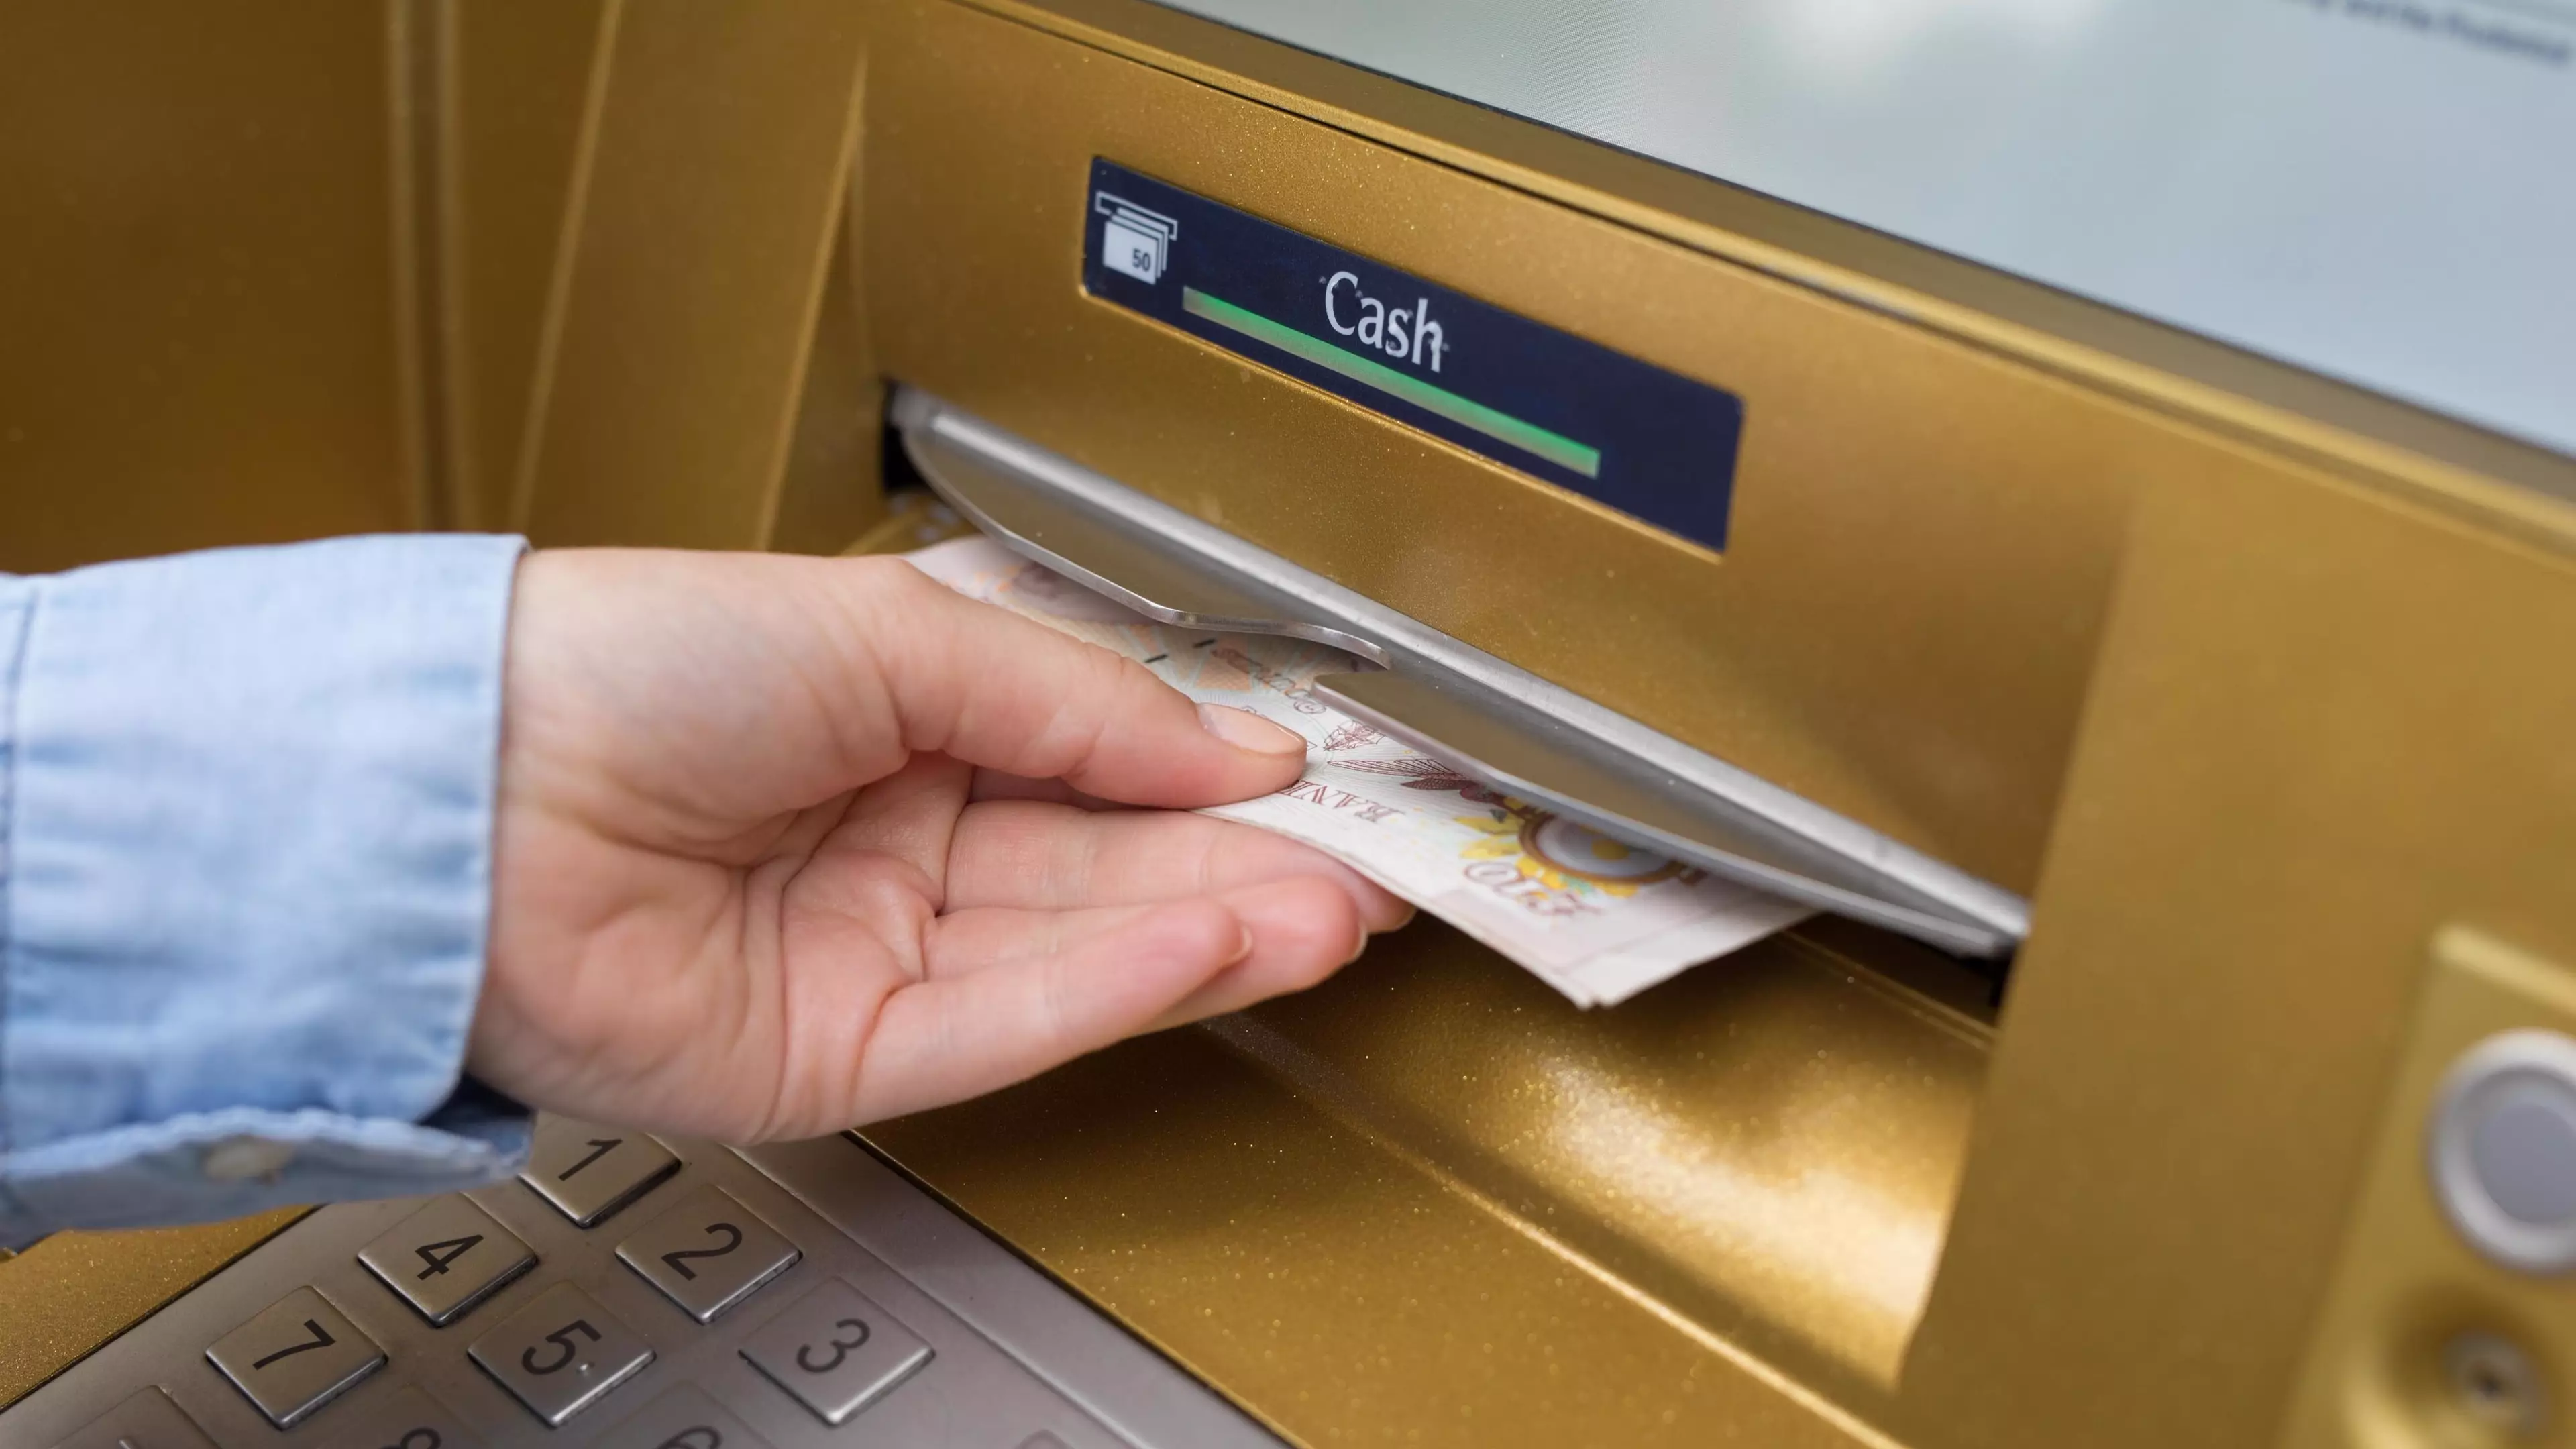 Free-To-Use Cash Machines Could Be At Risk As ATM Network Looks To Cut Costs